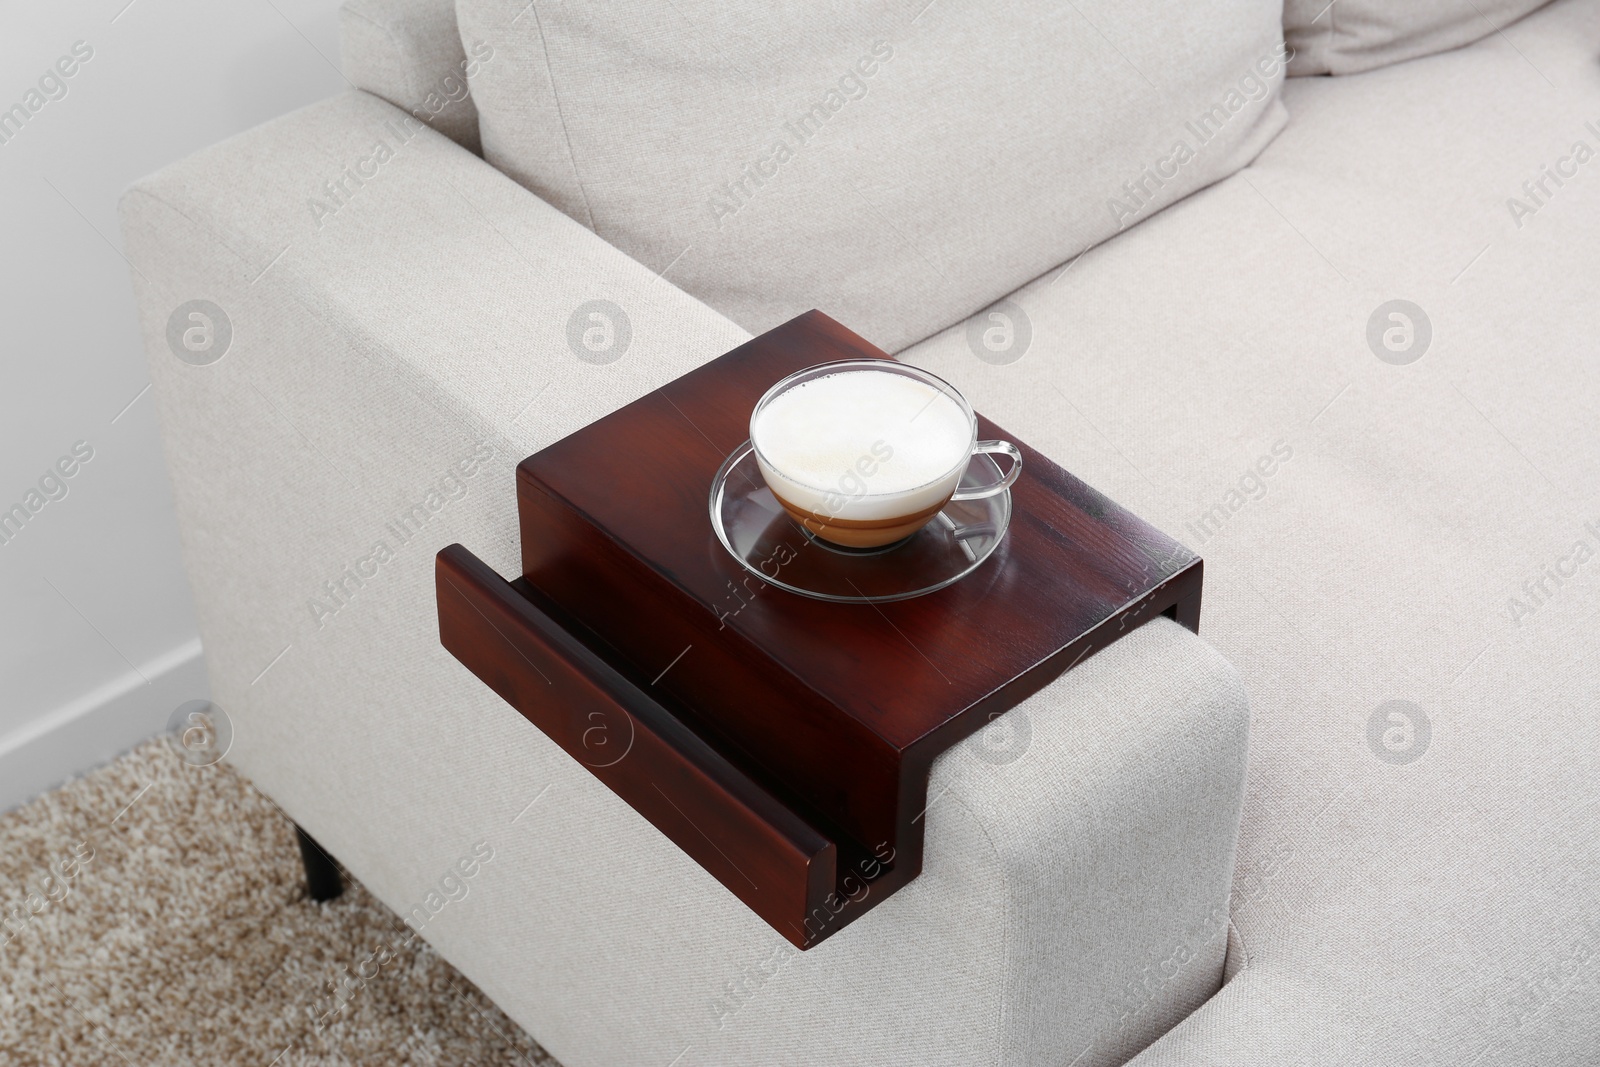 Photo of Cup of coffee on sofa with wooden armrest table indoors. Interior element